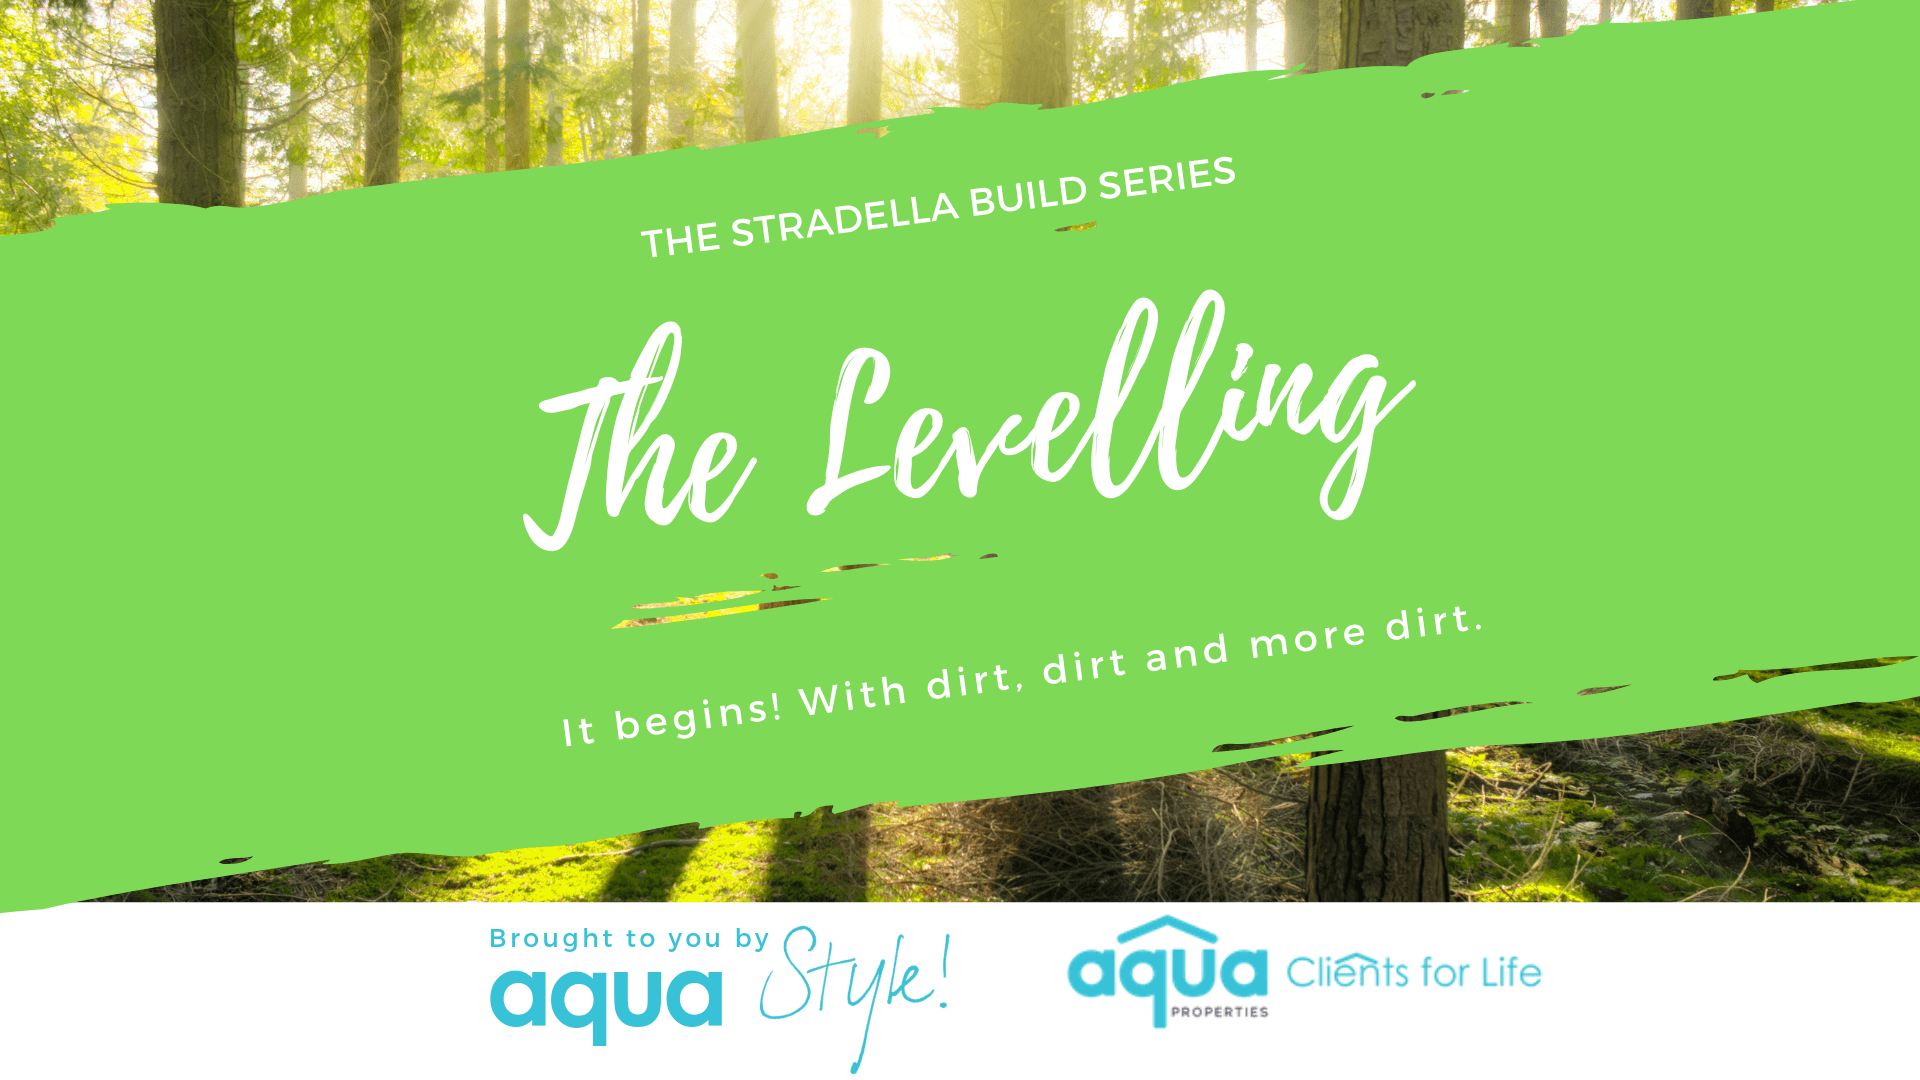 The Stradella Home Build Series - The Levelling: by Aqua Properties North Lakes Mango Hil